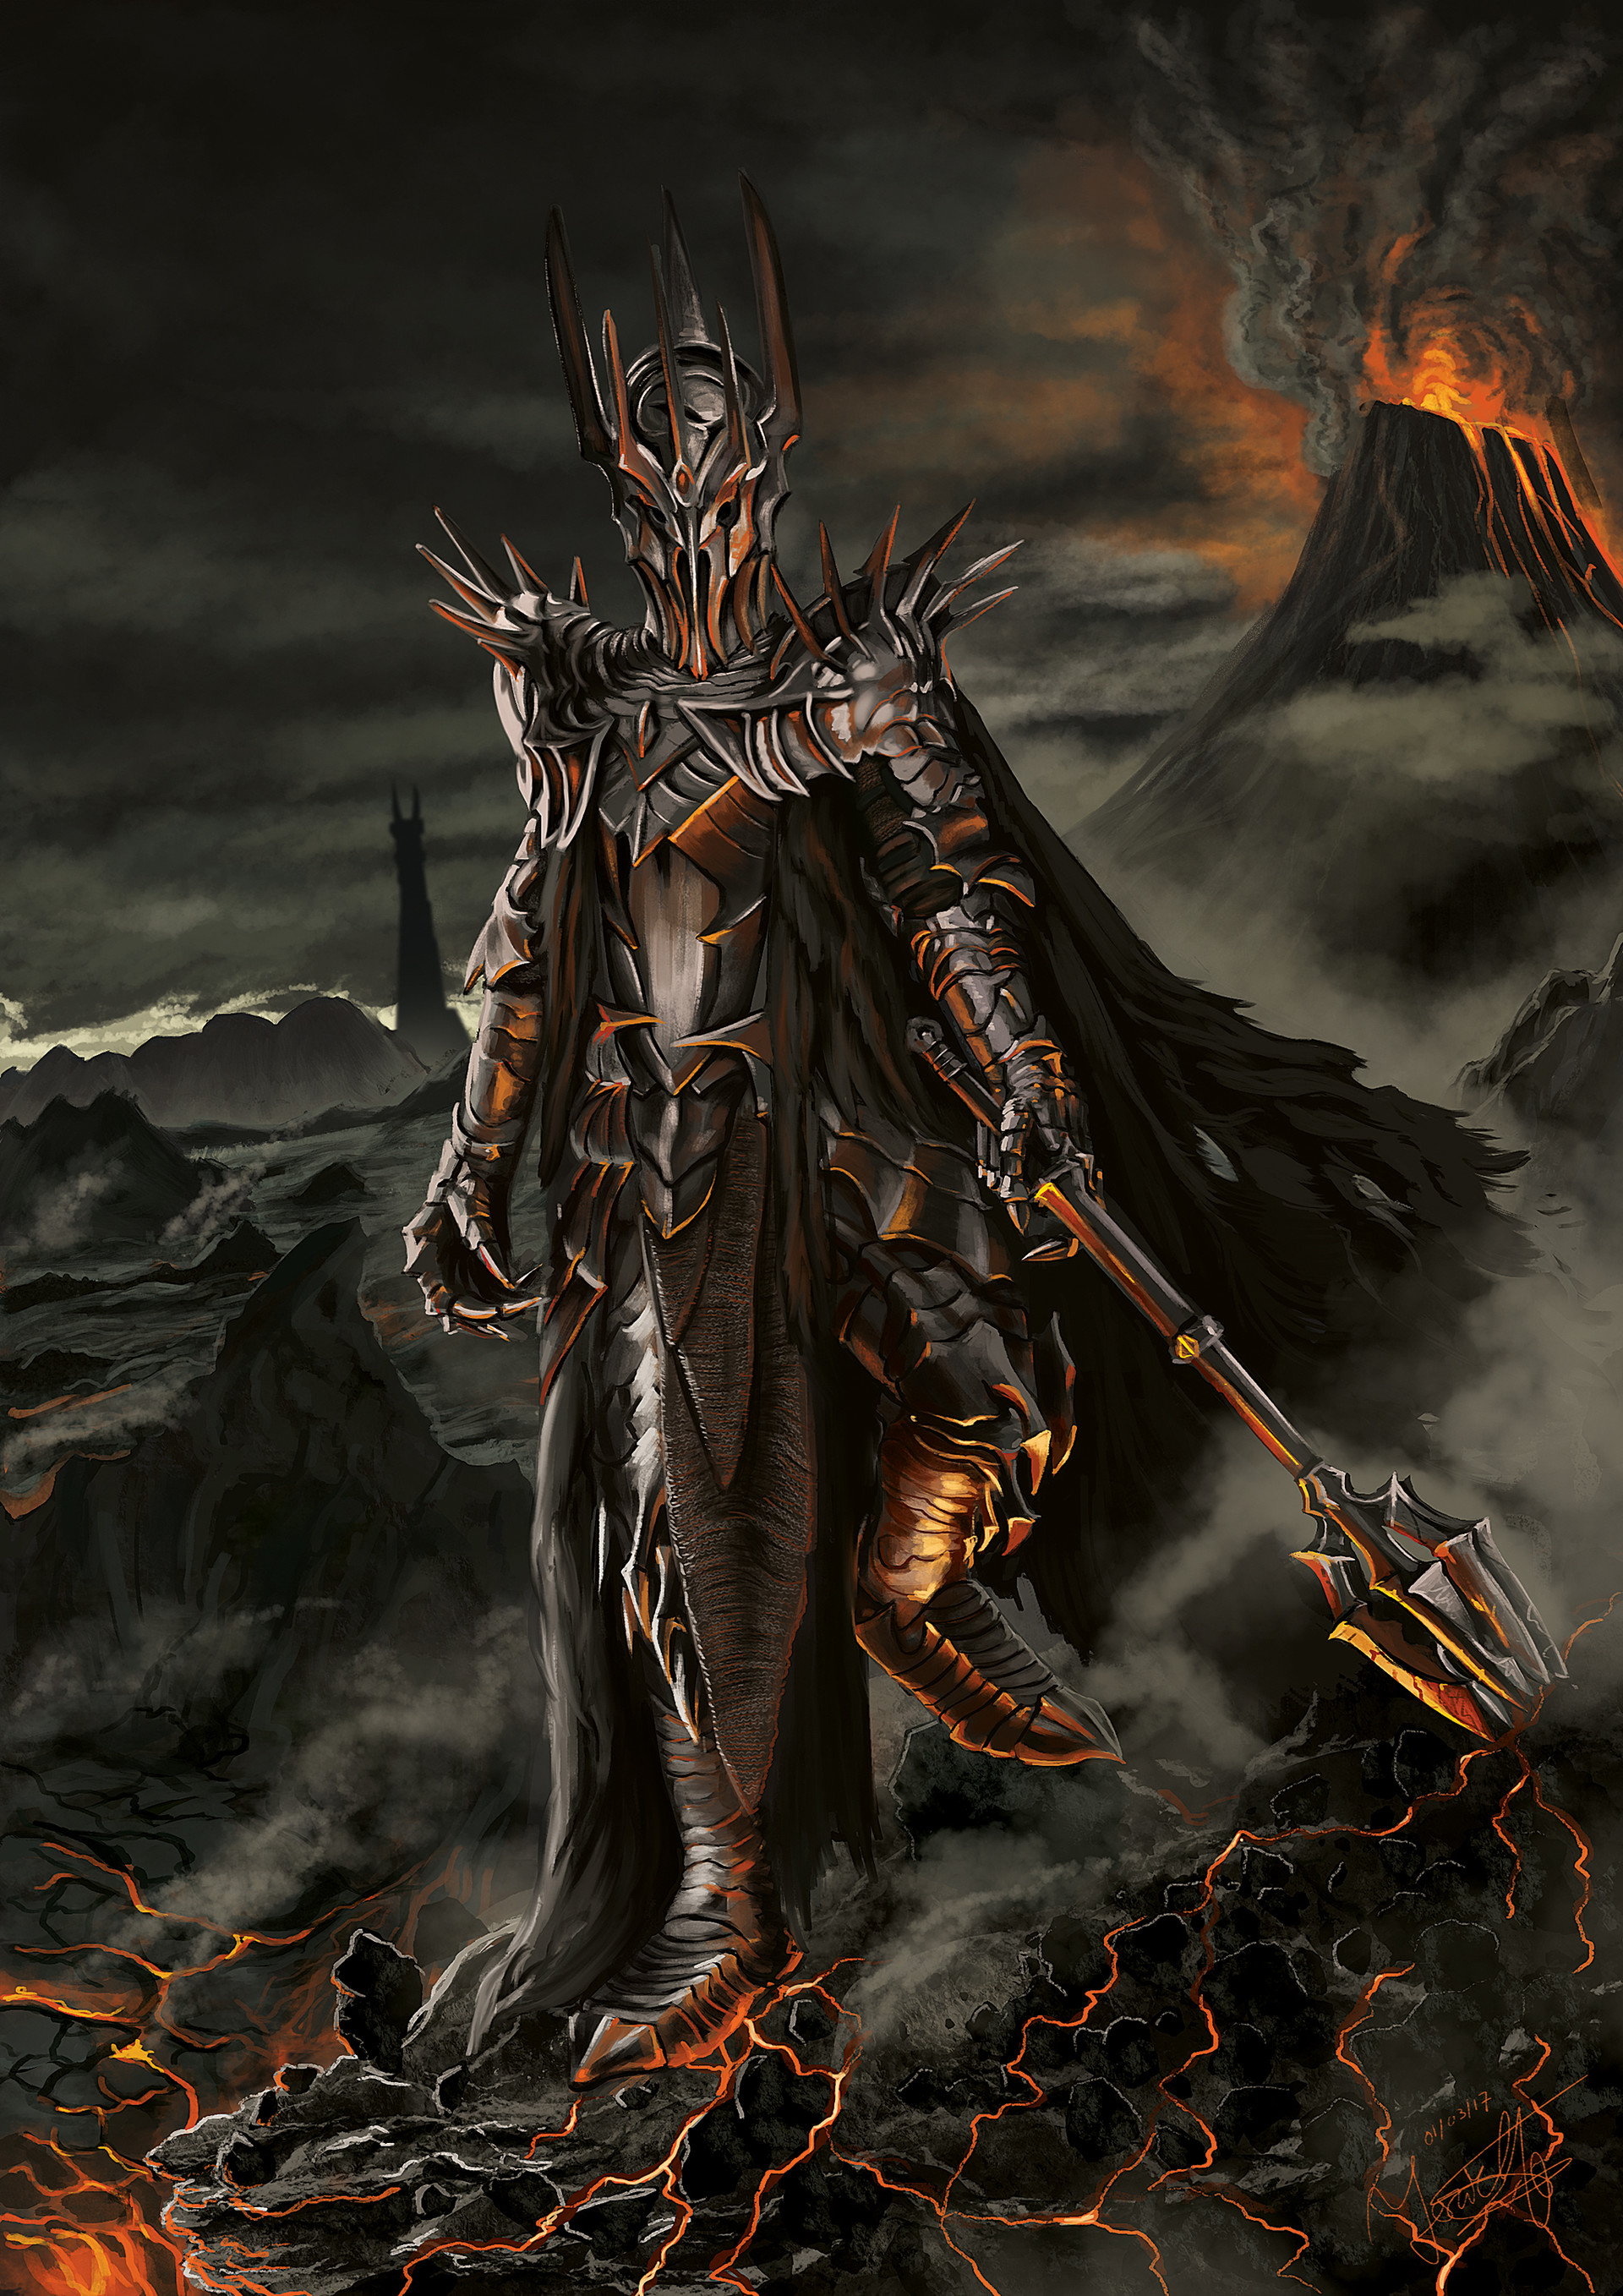 Sauron (Lord of the Rings) Minecraft Skin